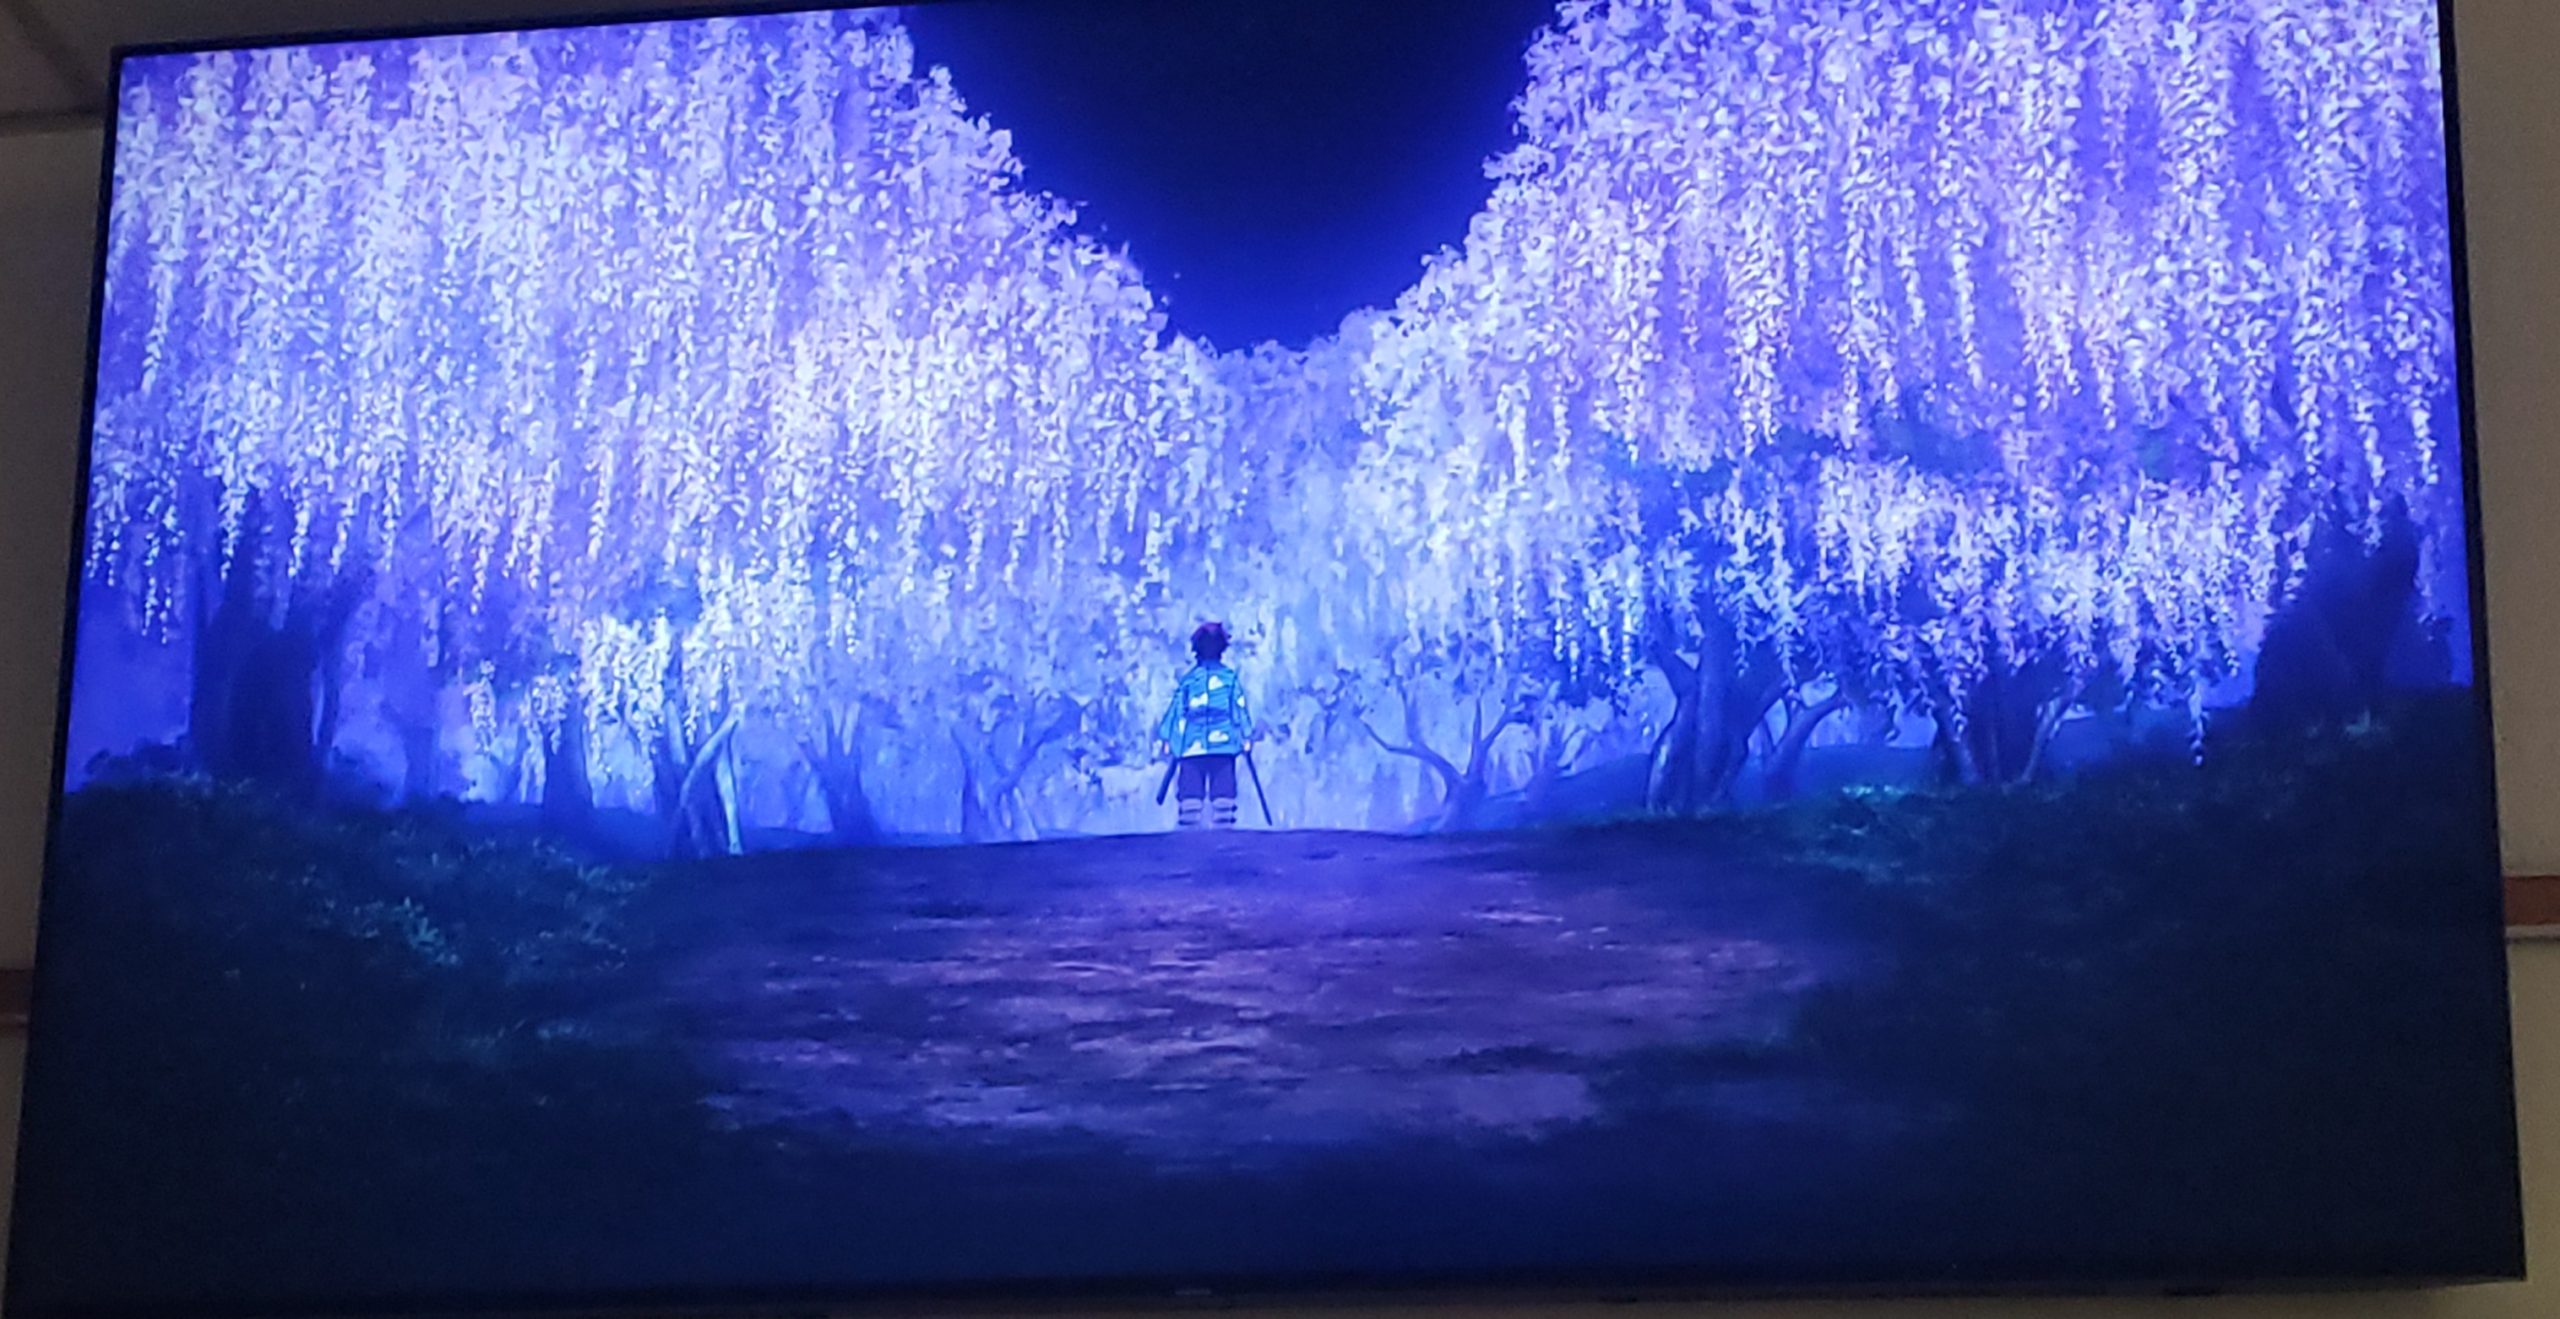 A scene from the anime Demon Slayer, showing a figure in a green kimono staring at a forest filled with glowing blue trees